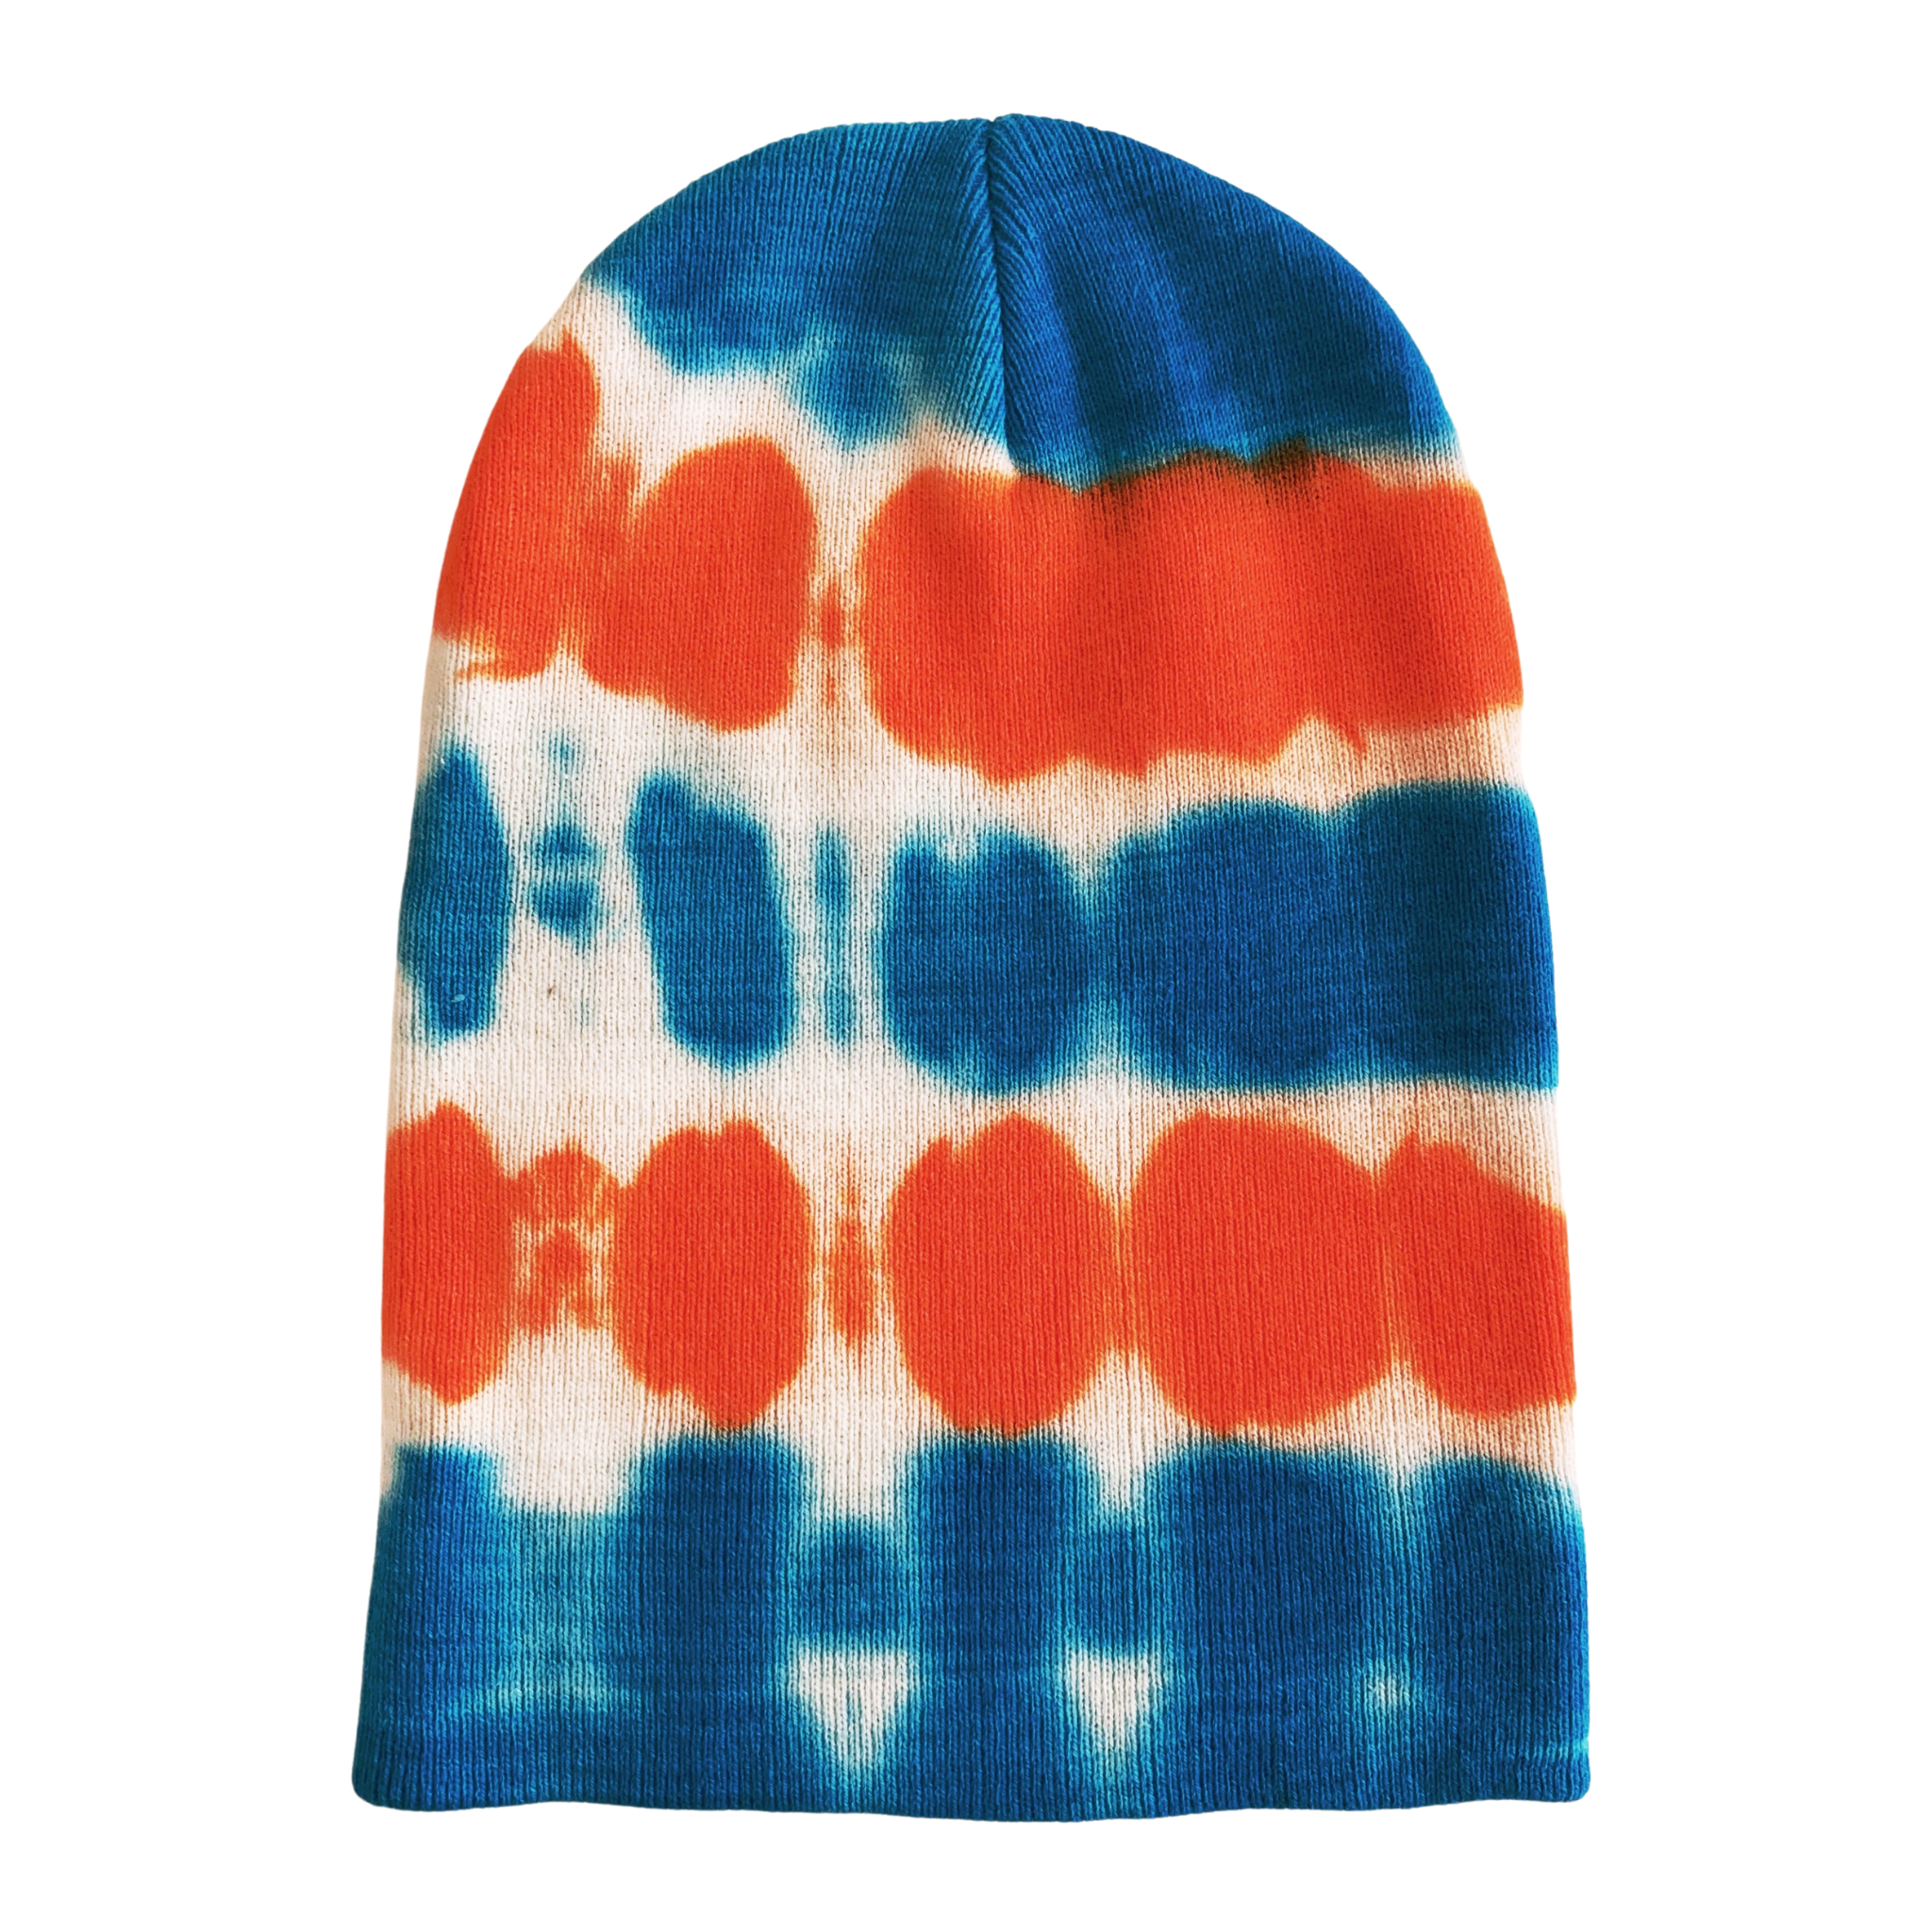 Turquoise and orange tie dye beanie hat long view 2. For men and women. Made of soft and warm cotton with a little stretch to it. Made in California. USA made.